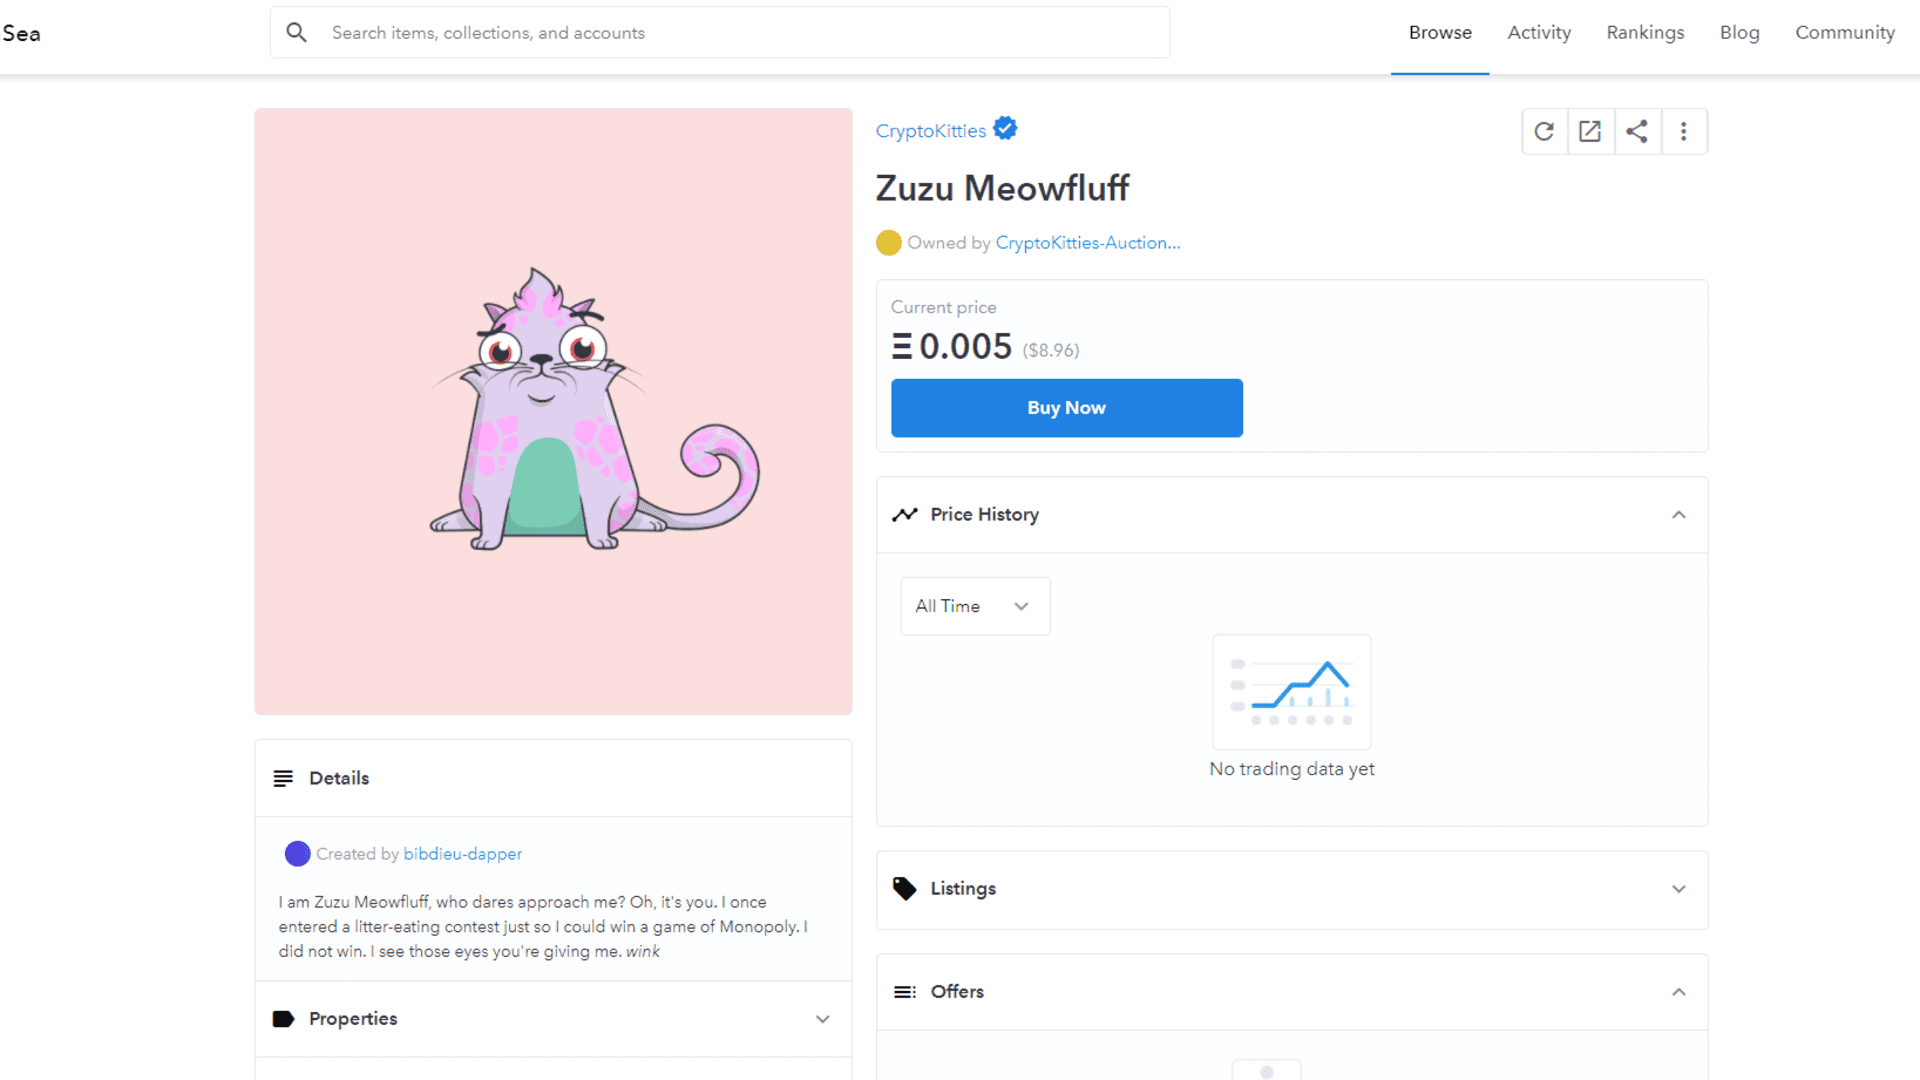 Here's a collectible CryptoKitties NFT.